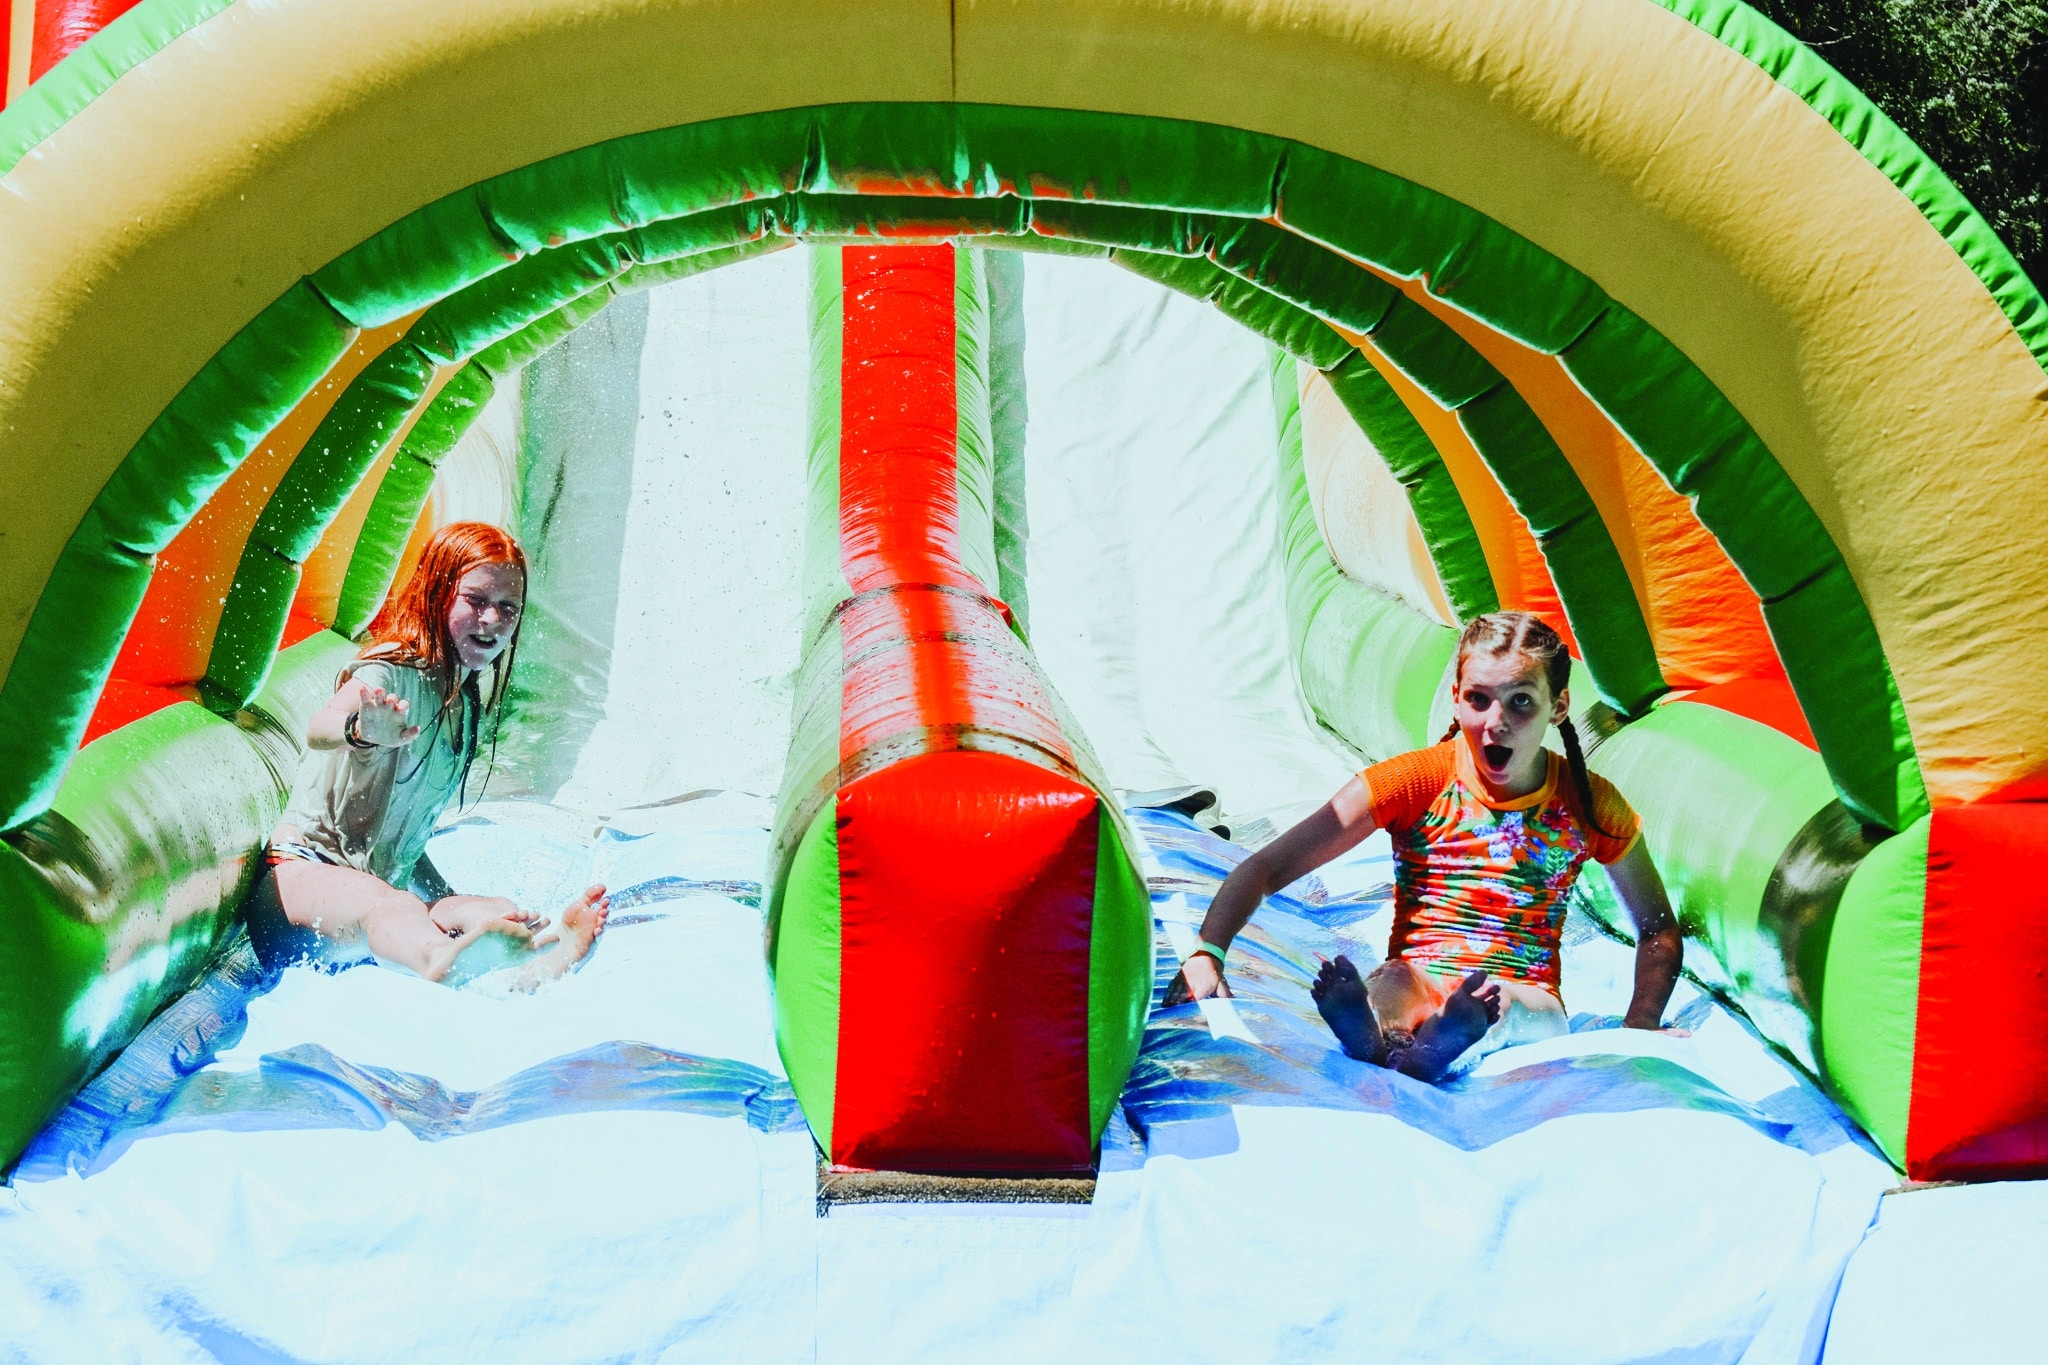 Summer Camp: A Week of Good News and Fun | Eagle Lake Camps | Children having fun on a bounce house in the Summer